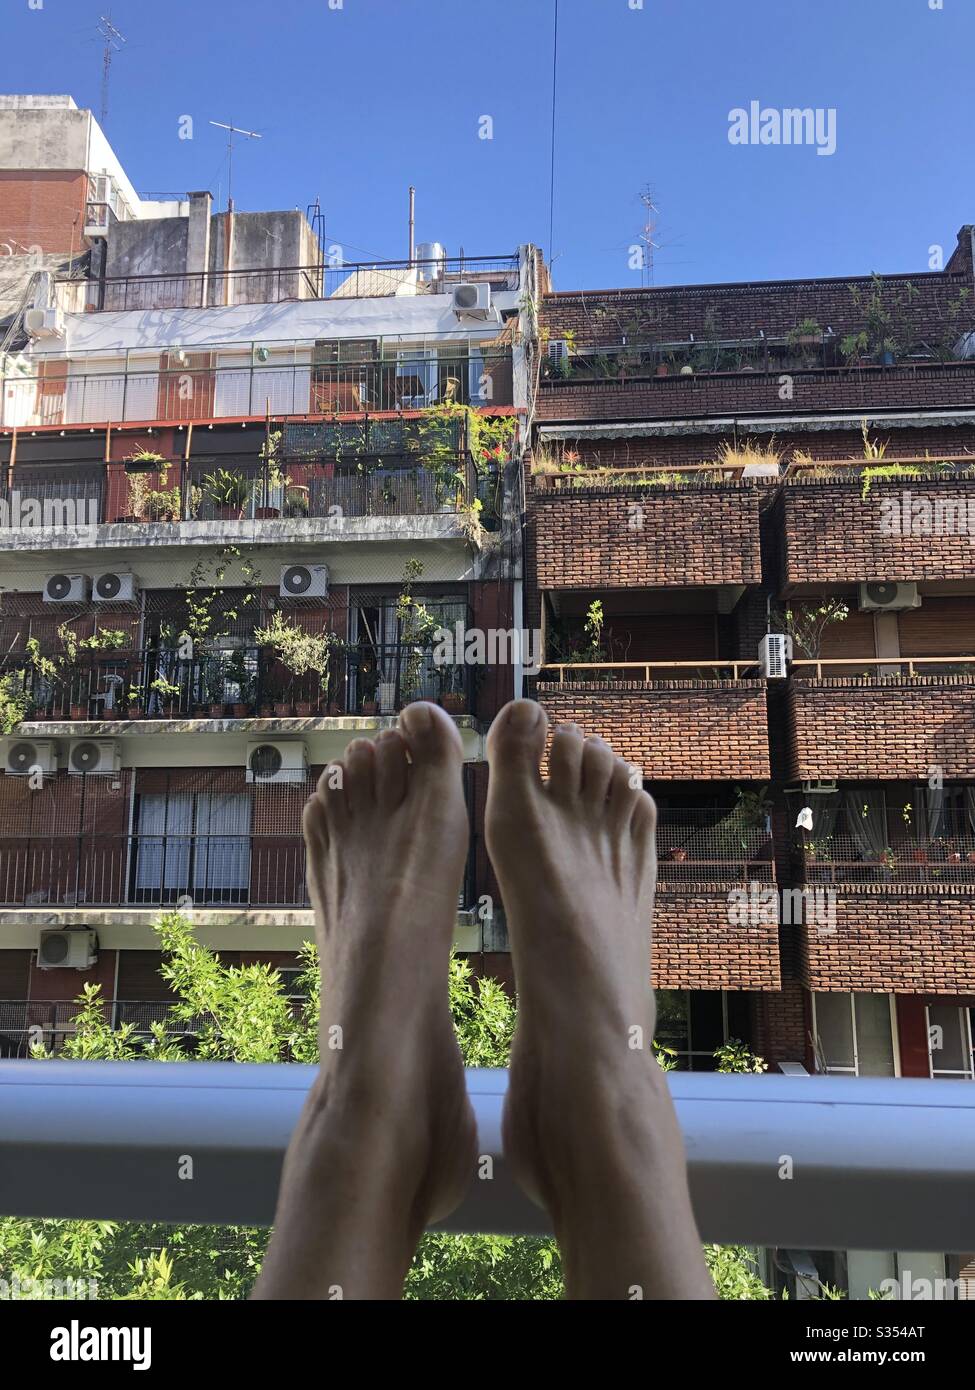 Relaxing on the balcony in Buenos Aires during quarantine 2020. Stock Photo